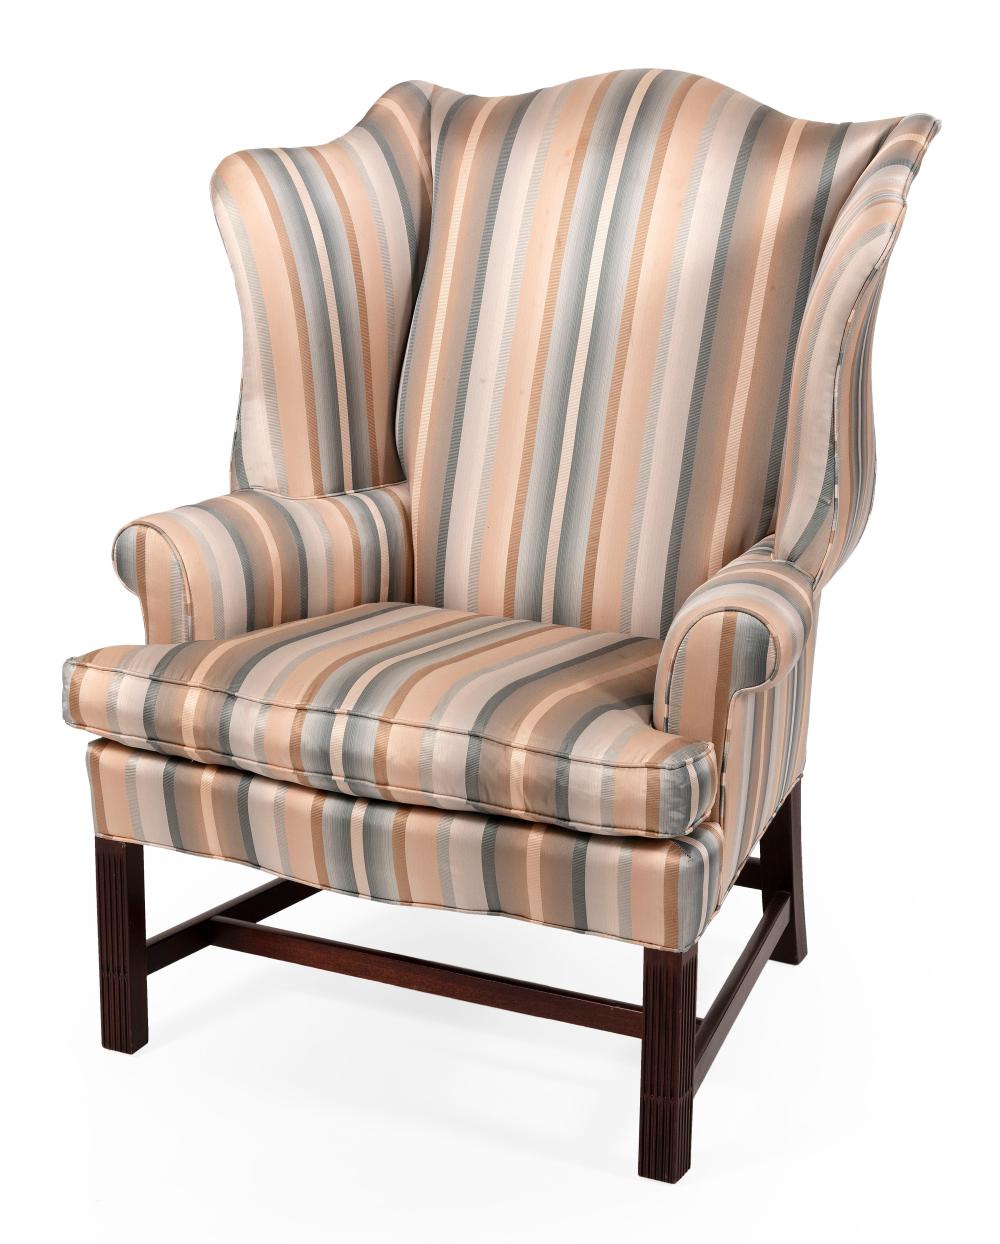 CUSTOM CHIPPENDALE-STYLE WING CHAIR